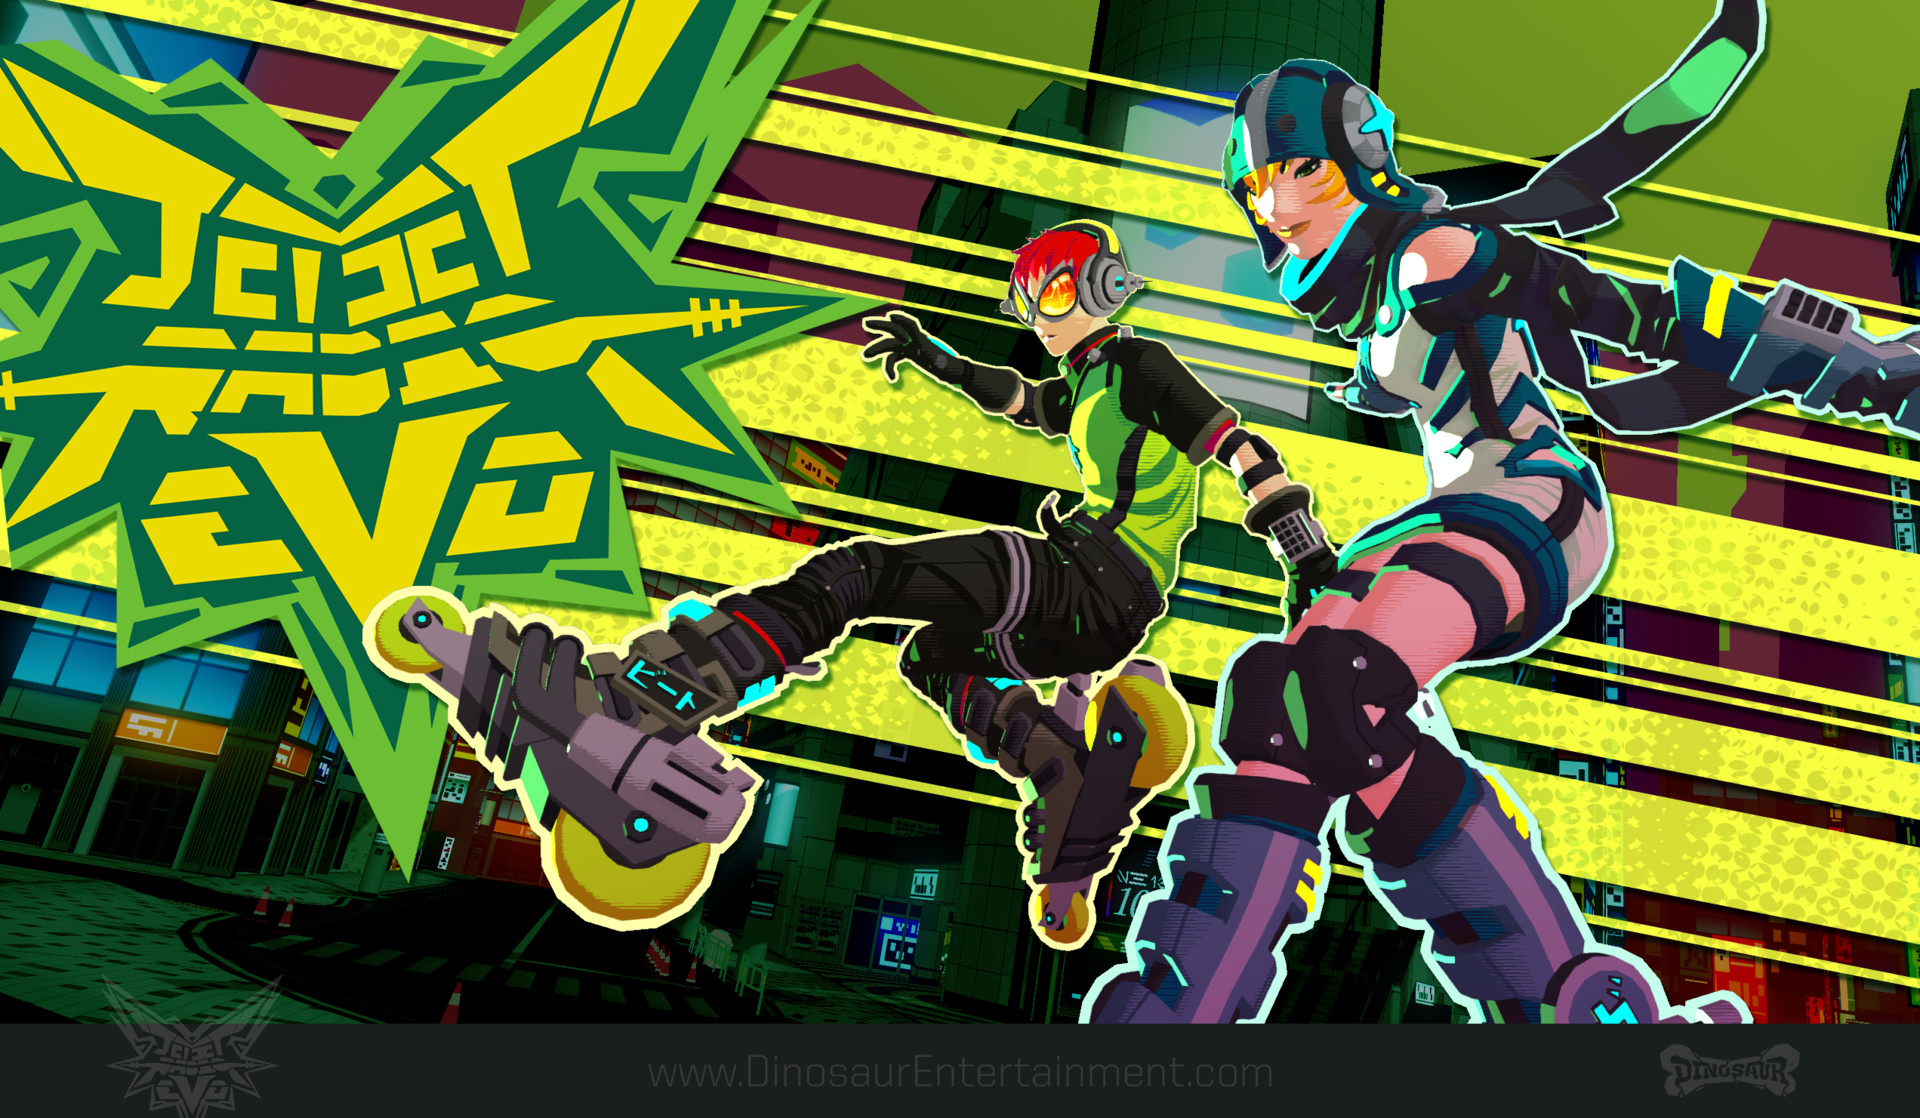 A Potential Jet Set Radio Title Has Been Rejected By Sega